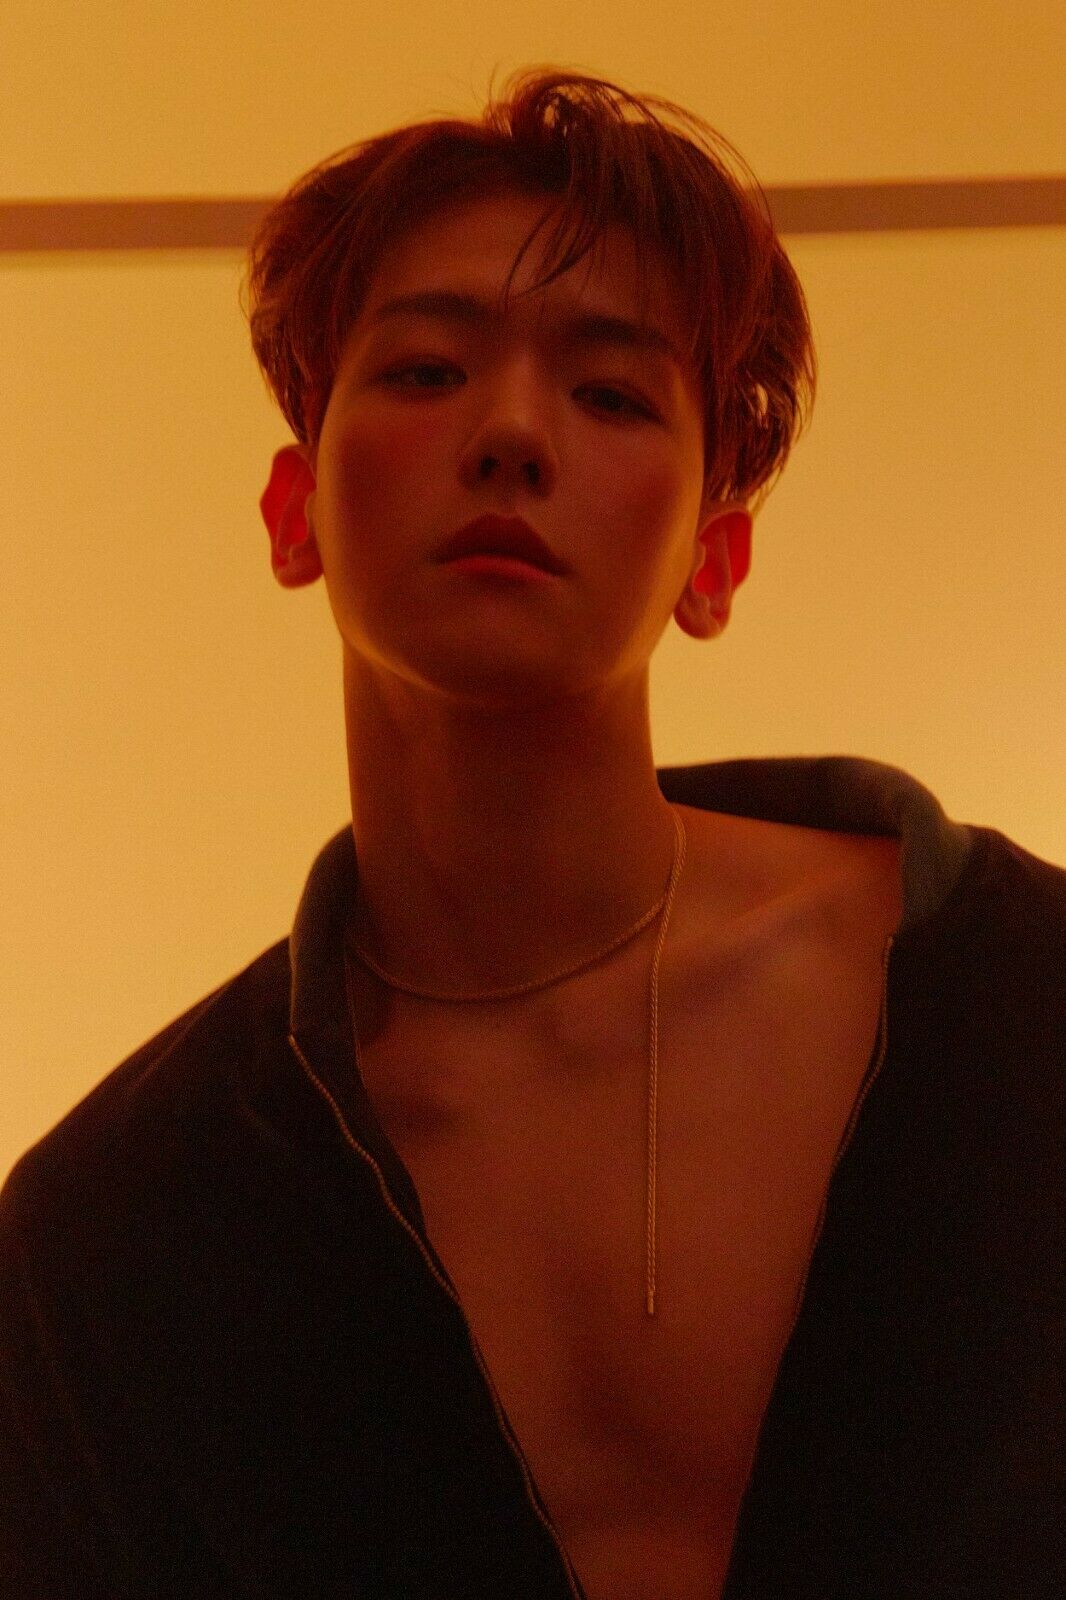 EXO BAEKHYUN, 2nd mini album 'Delight' released on May 25th! A total of 7 songs with various atmospheres included! EXO's B...